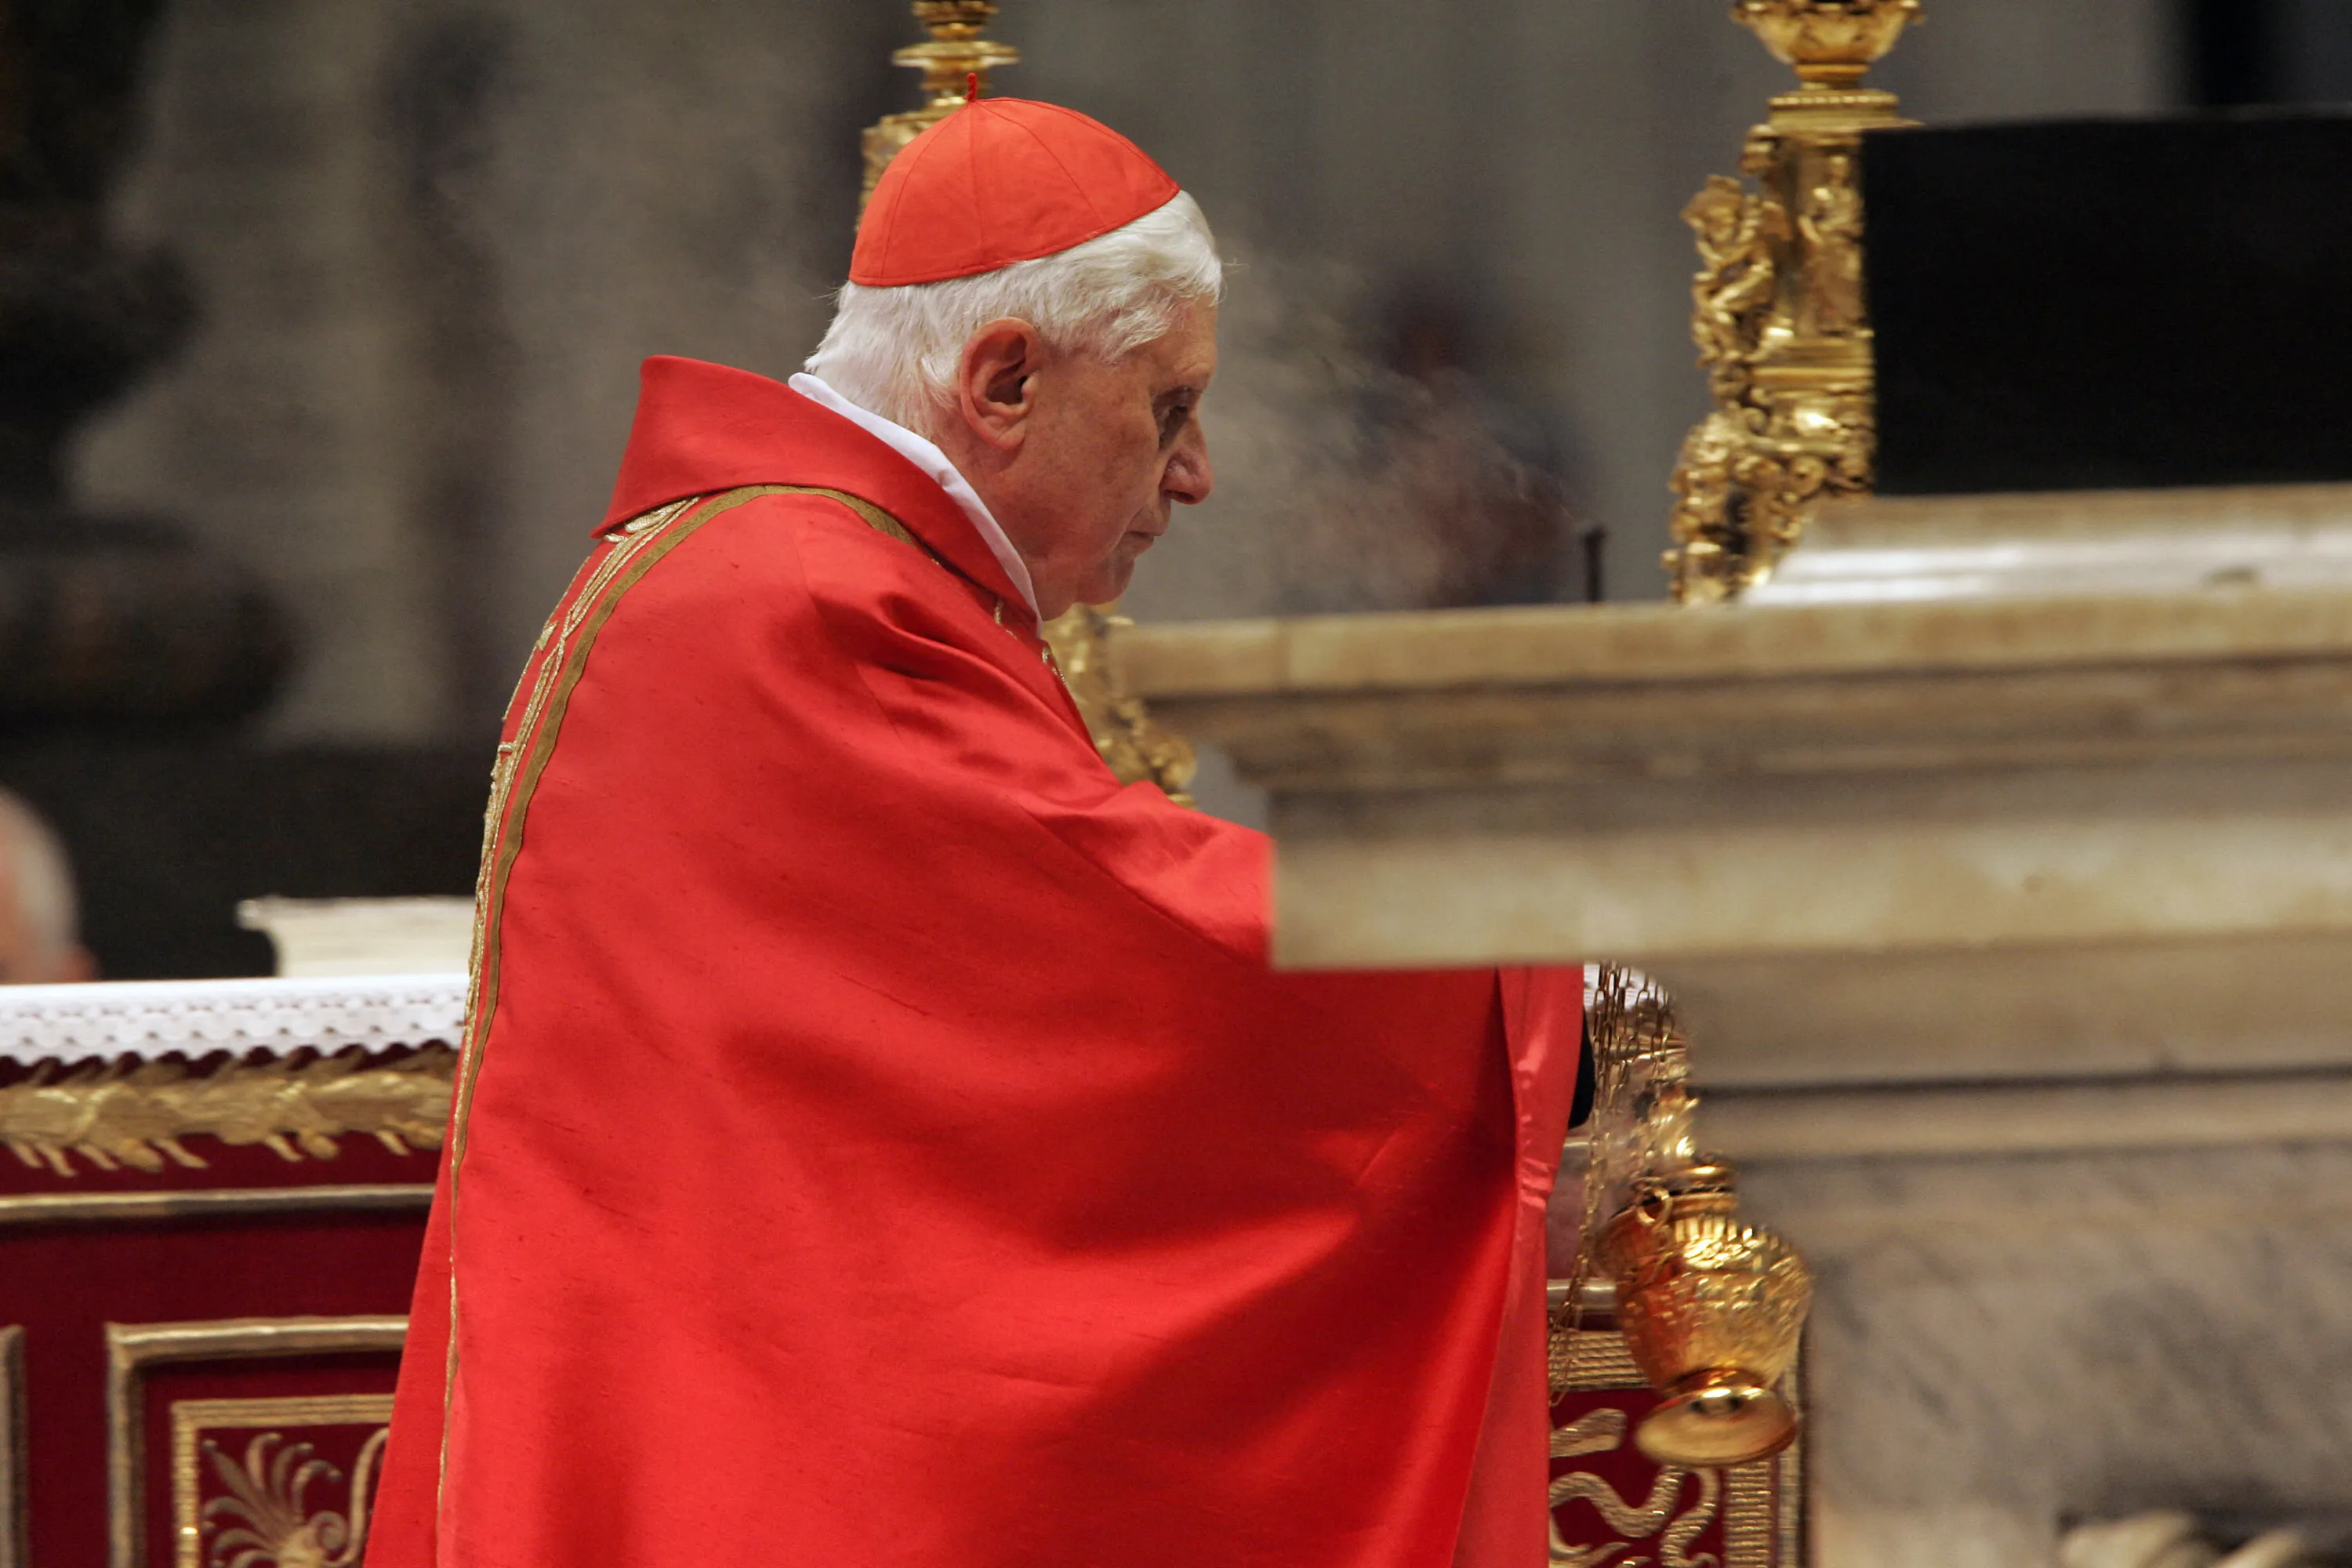 Pope Francis: I was ‘used’ against Ratzinger in 2005 conclave, but he was ‘my candidate’